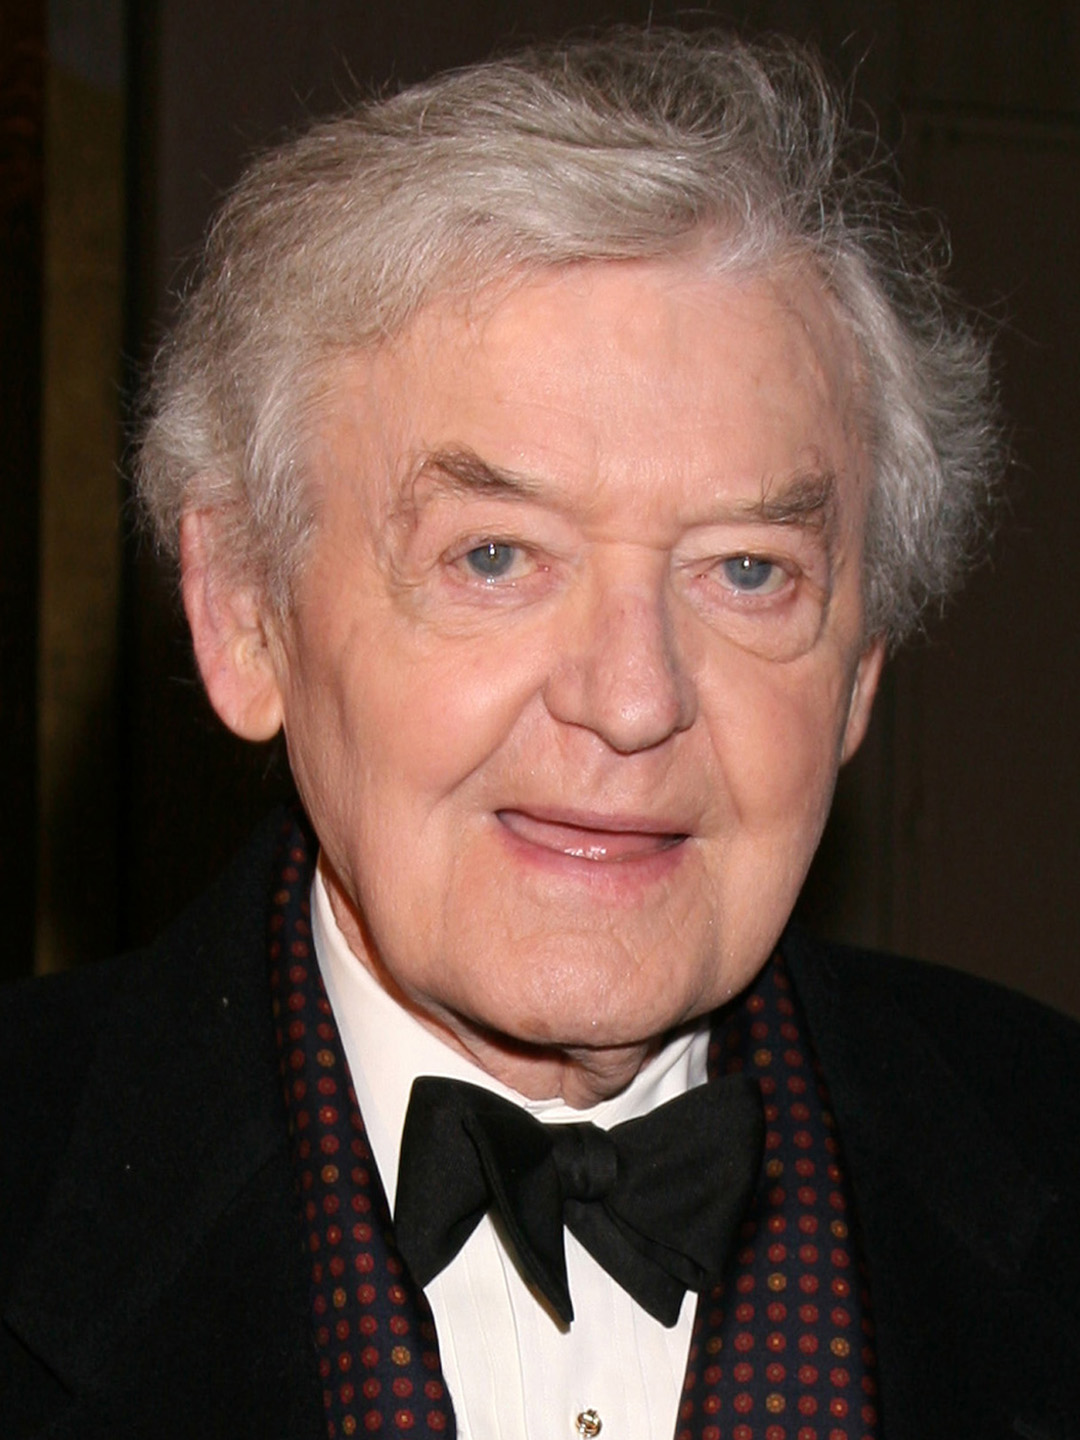 How tall is Hal Holbrook?